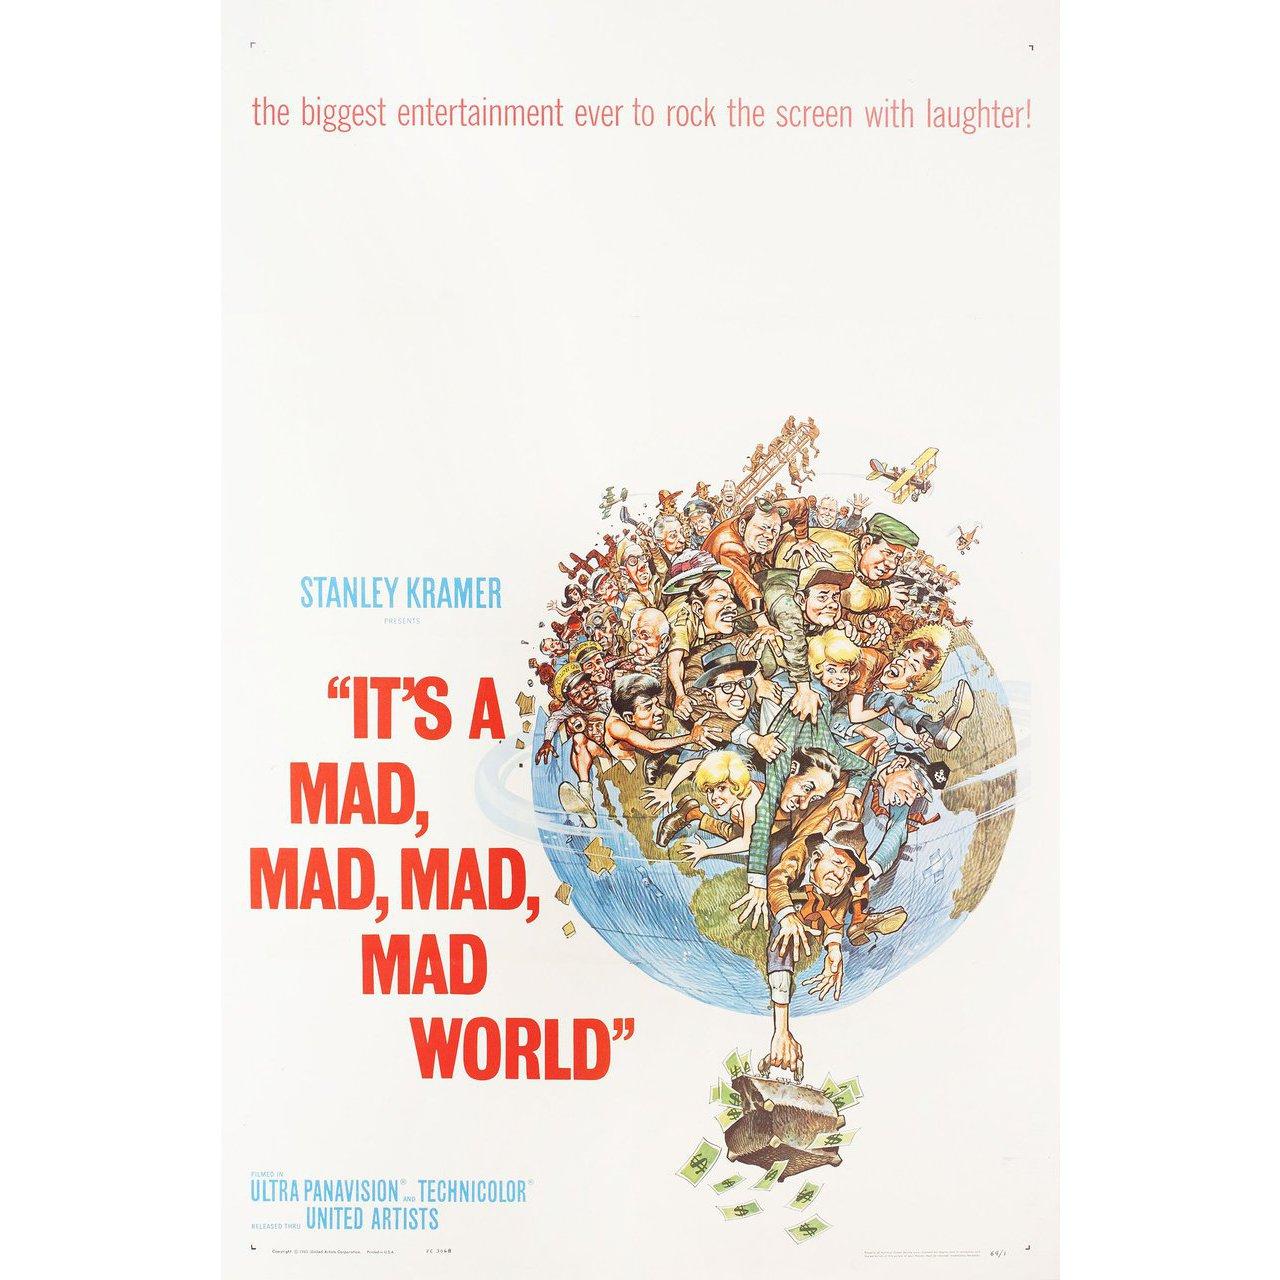 Original 1963 U.S. one sheet poster by Jack Davis for. Very good-fine condition, folded. Many original posters were issued folded or were subsequently folded. Please note: the size is stated in inches and the actual size can vary by an inch or